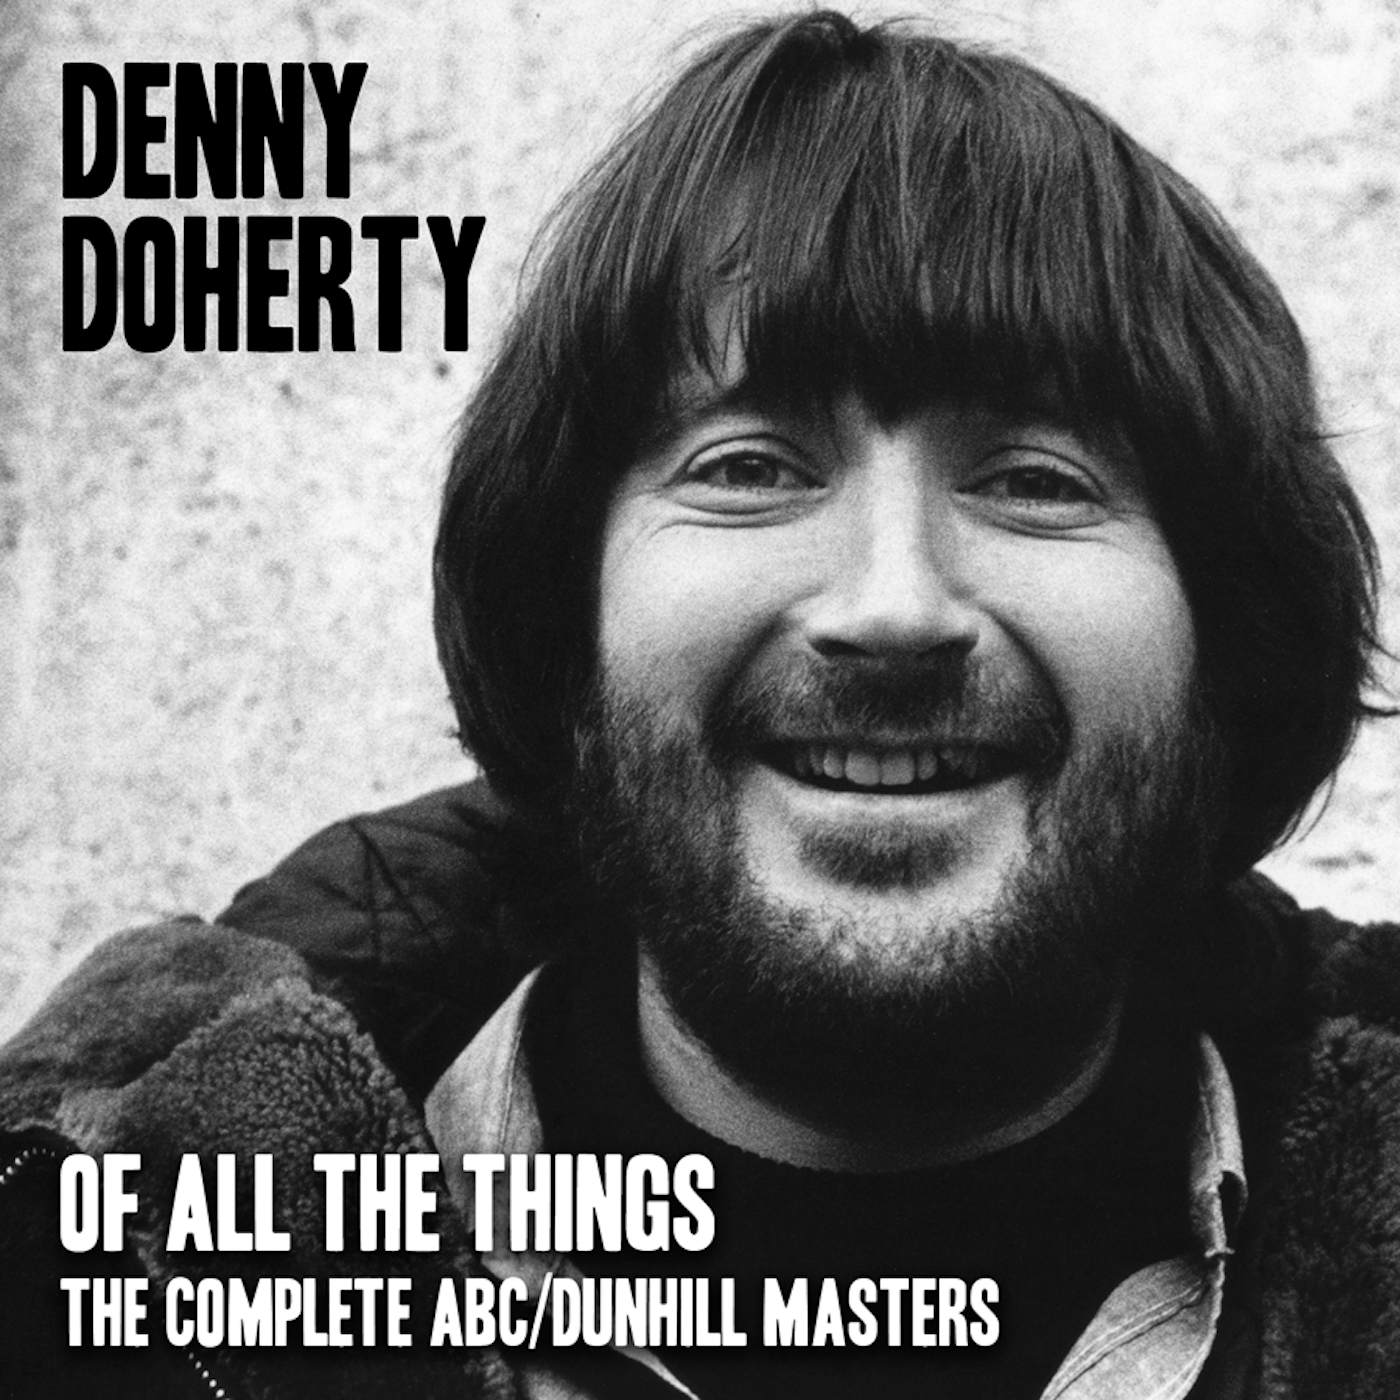 Denny Doherty OF ALL THE THINGS - COMPLETE ABC / DUNHILL MASTERS CD